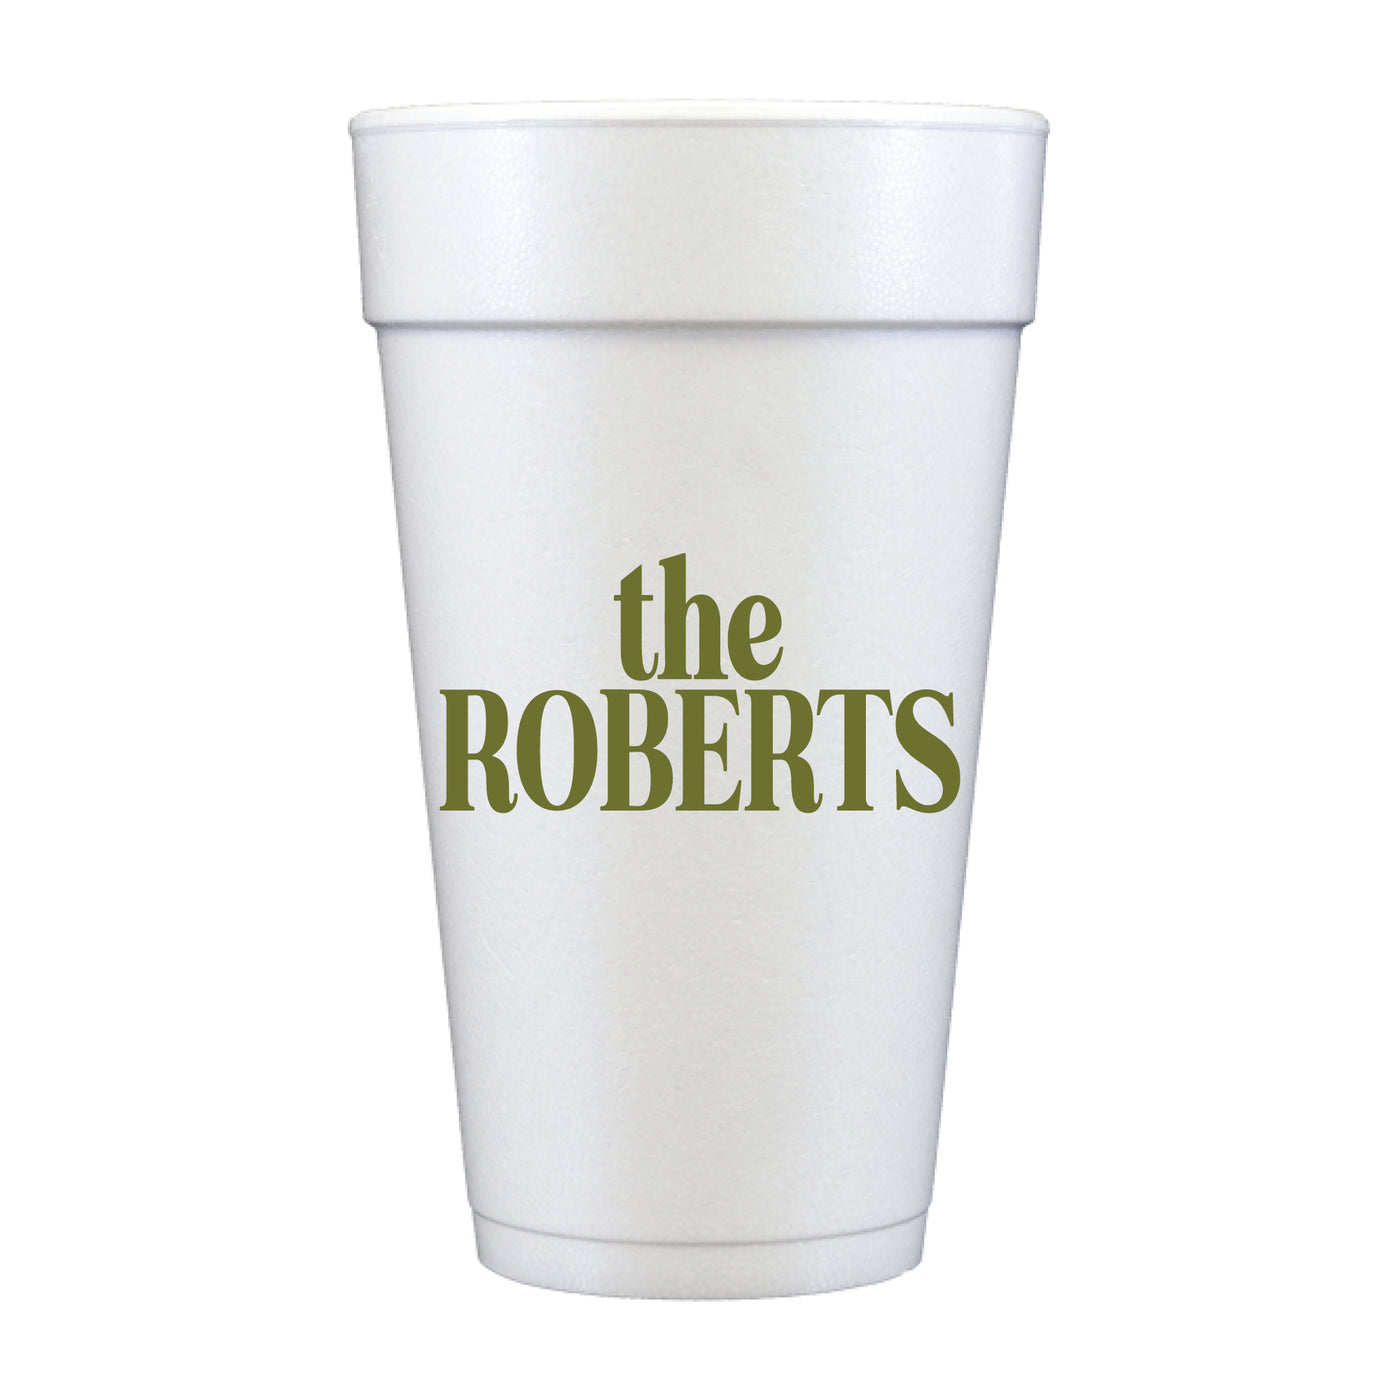 At Home Collection | Custom Last Name Foam Cups